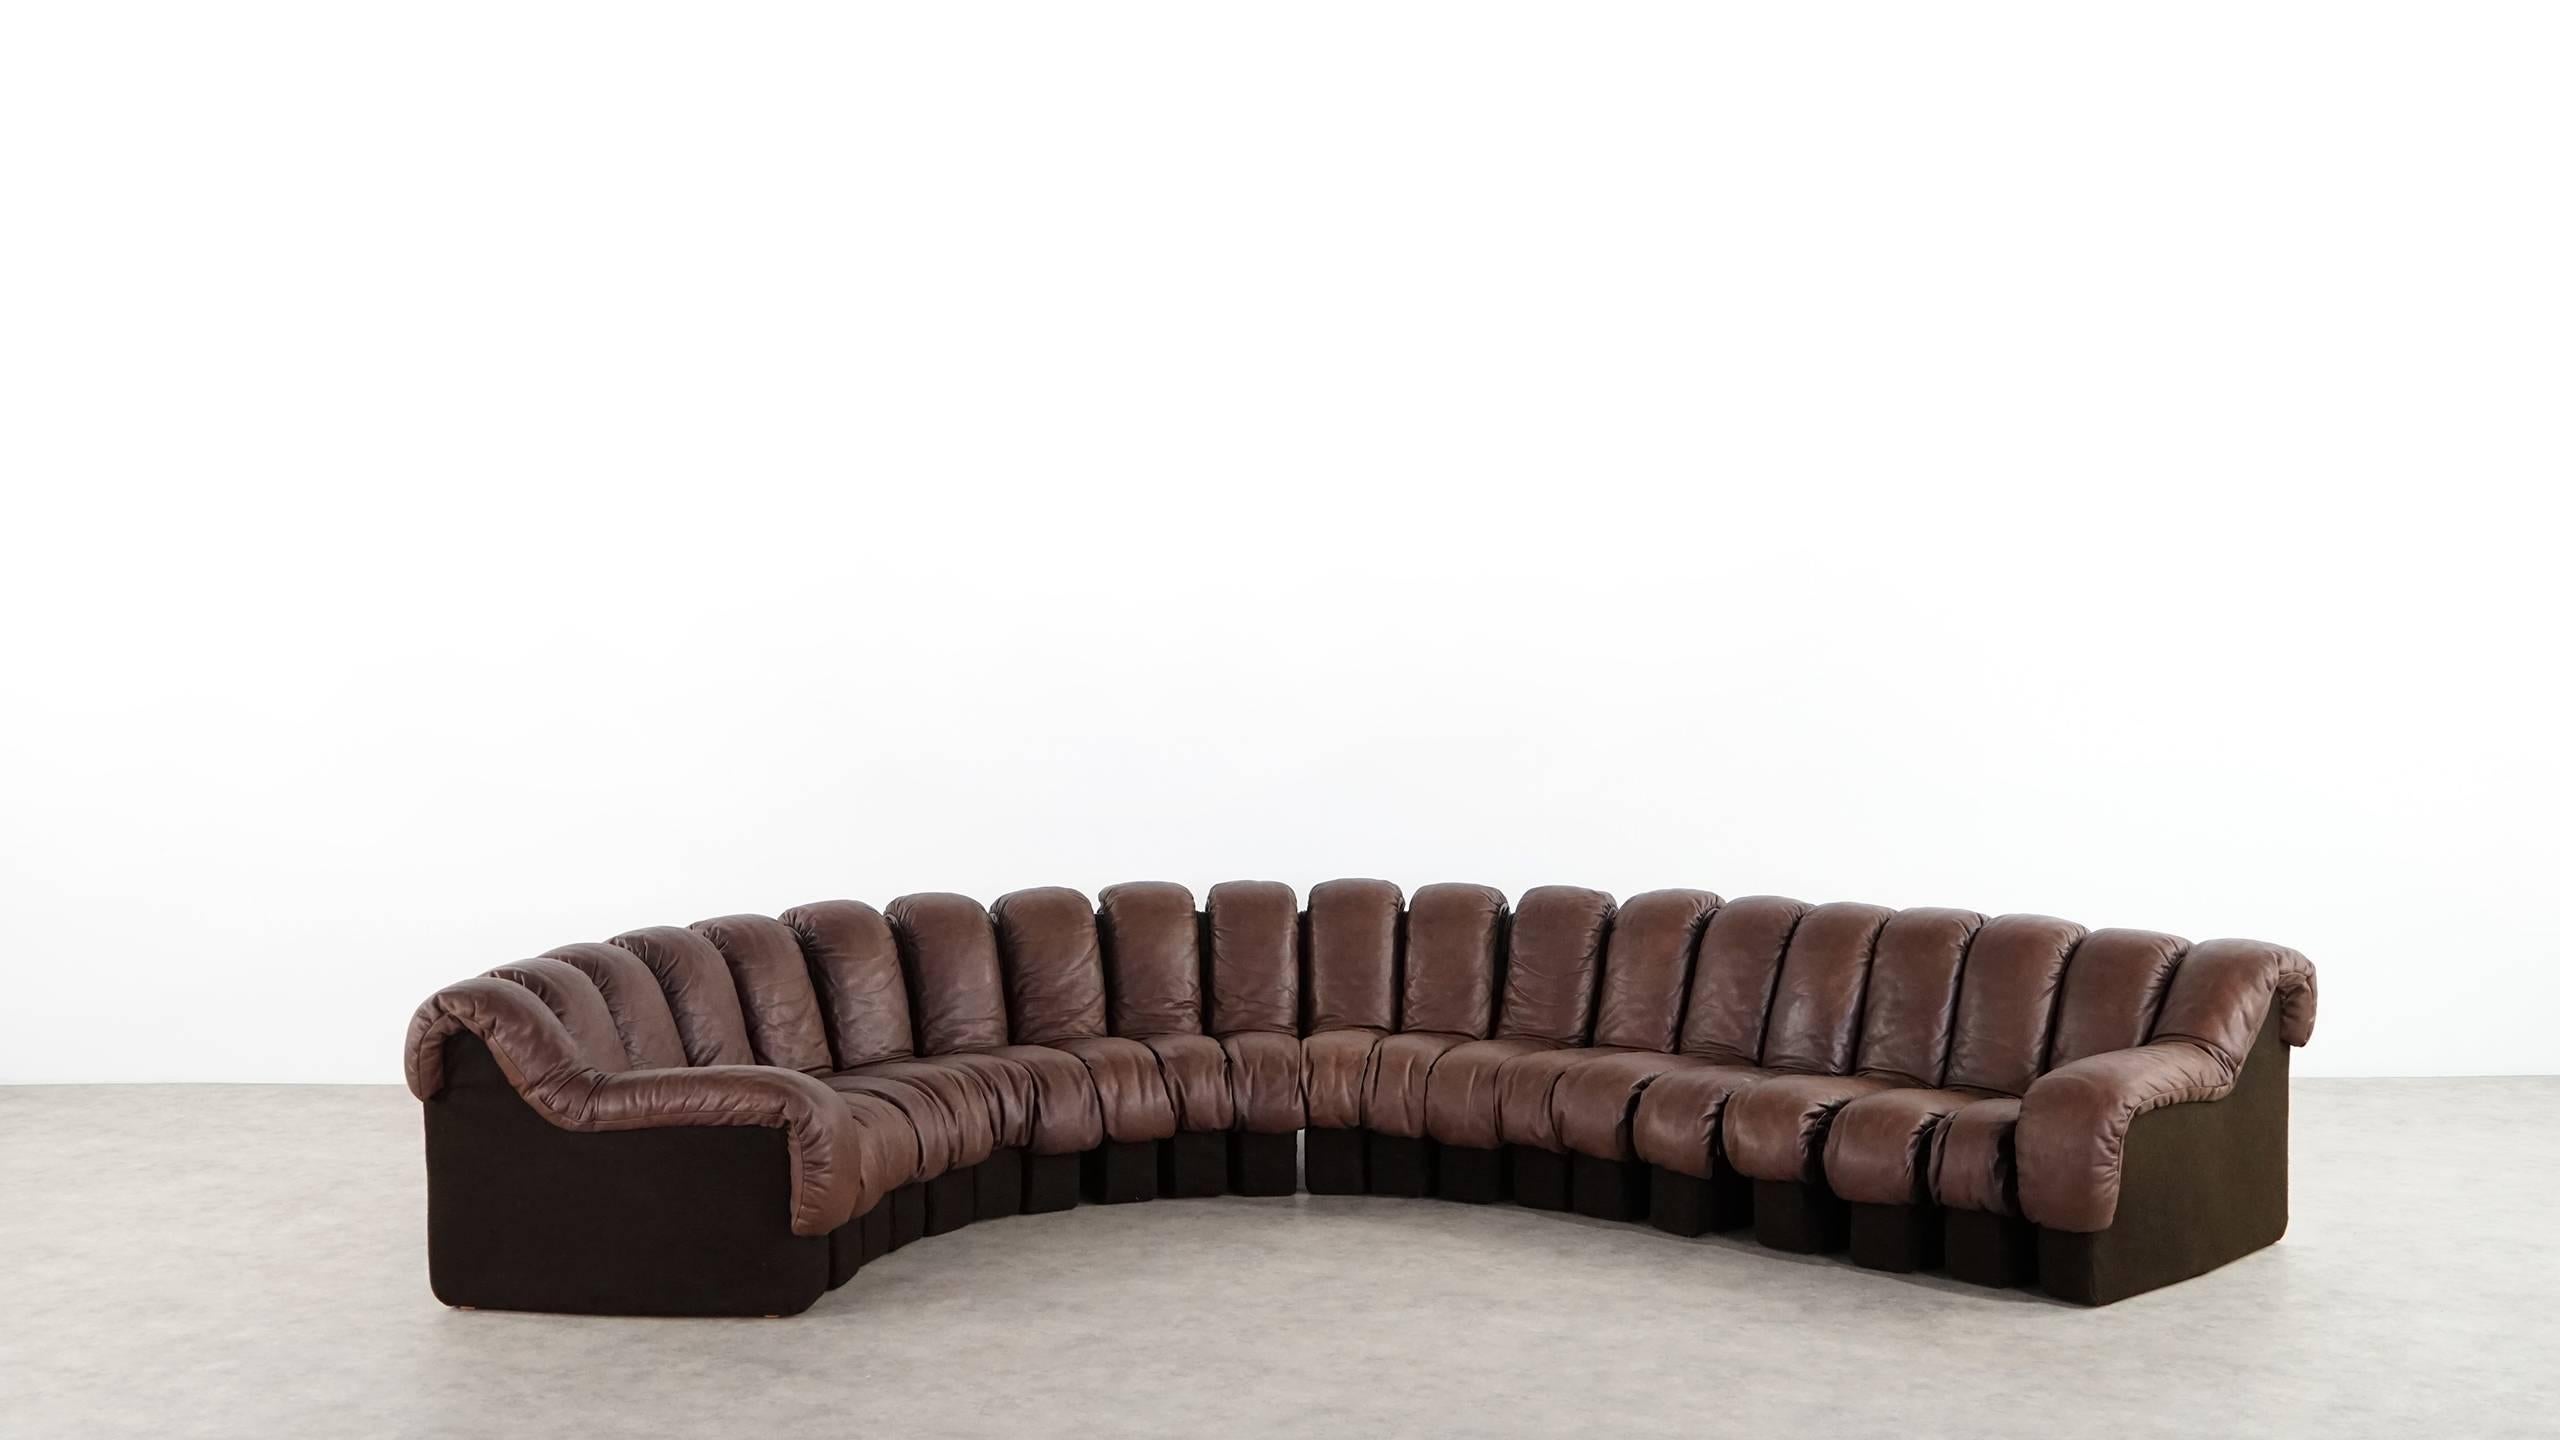 De Sede Ds 600 Sofa by Ueli Berger and Riva 1972, Chocolate Leather 20 Elements 4